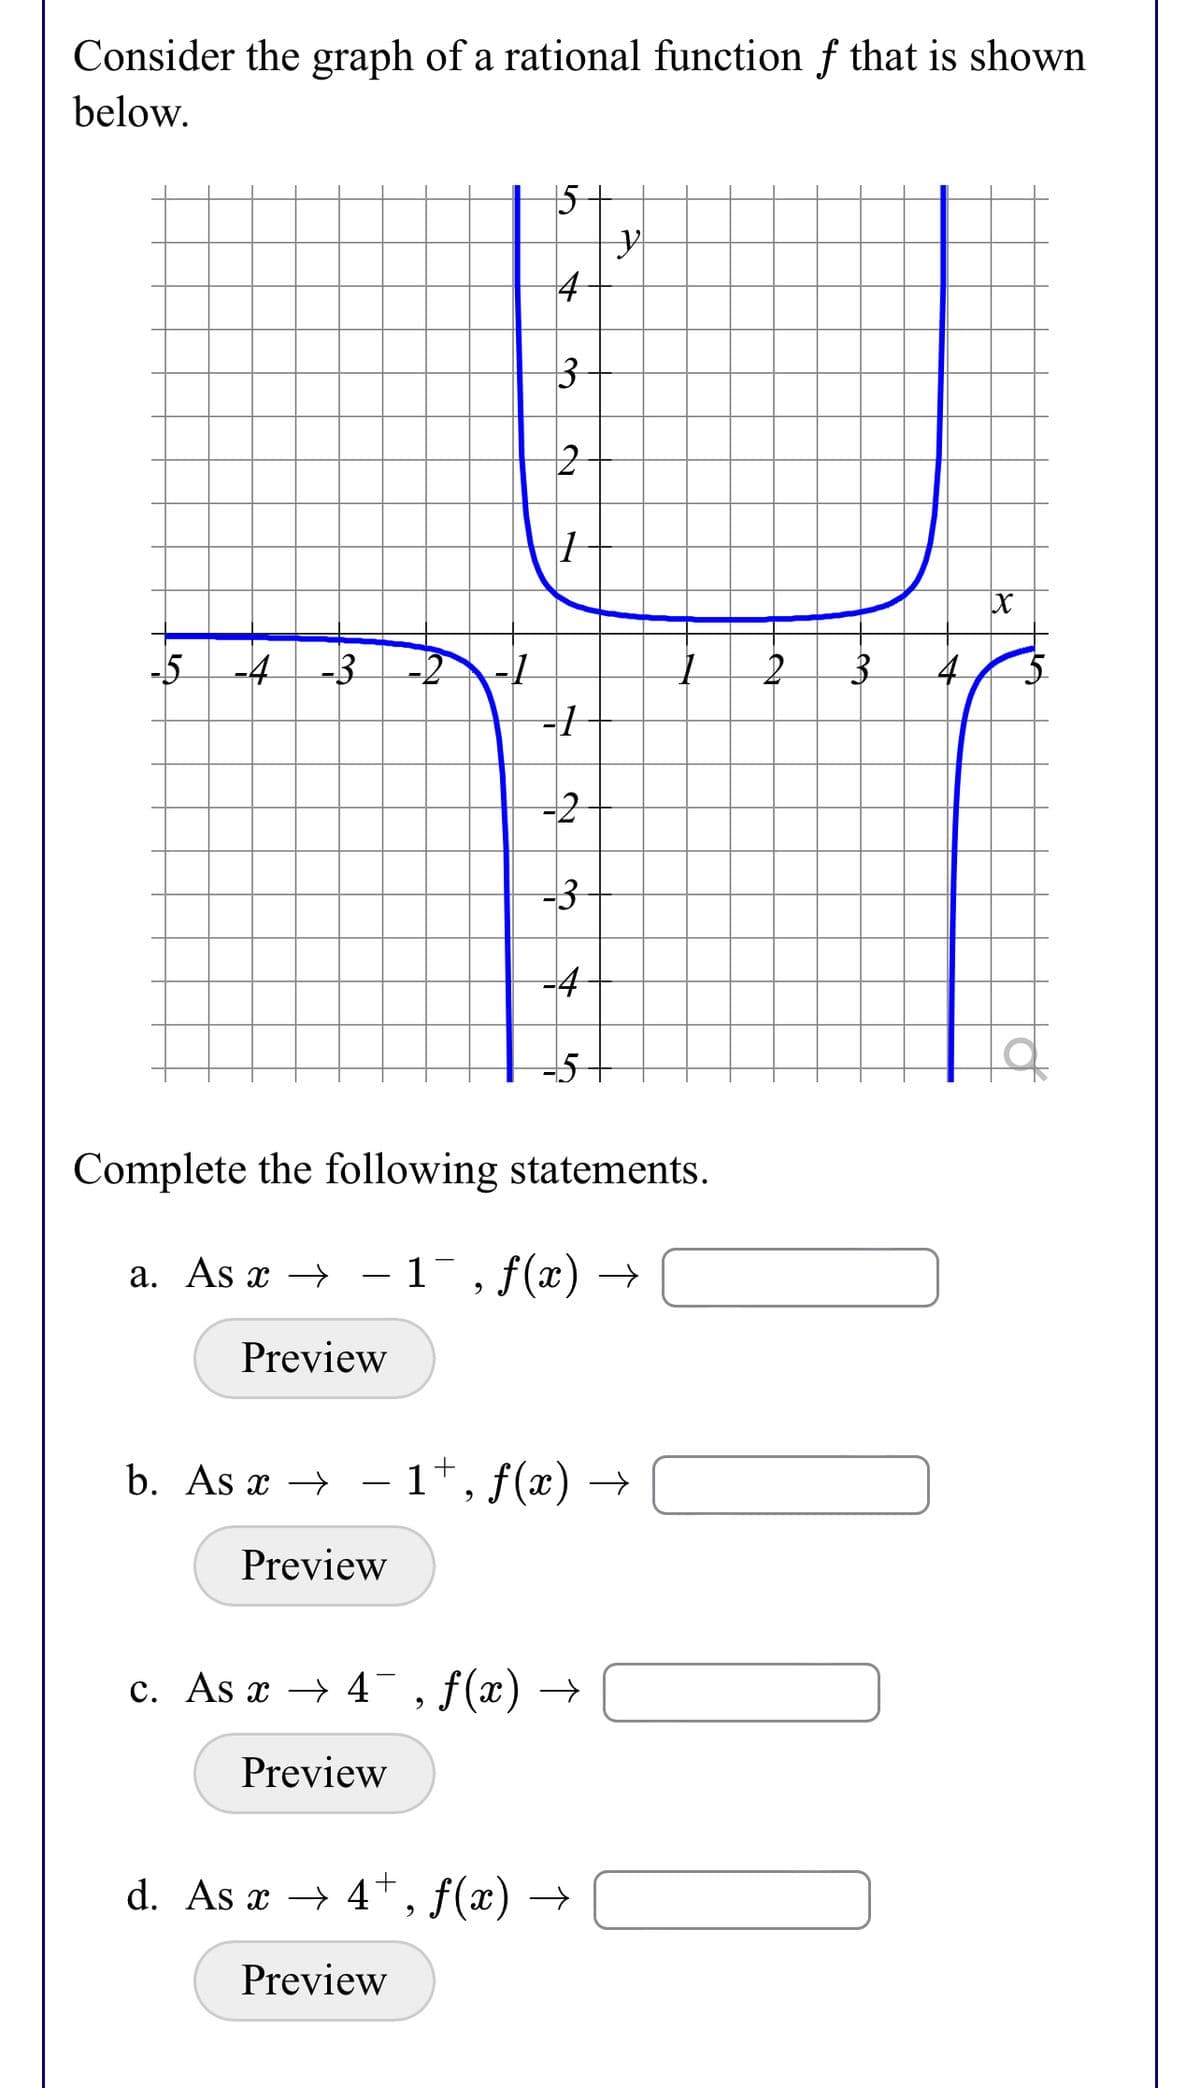 Consider the graph of a rational function f that is shown
below.
15
4
3
-5
-4
-3
-2
to
4
--
-2
-3
-4
-5
Complete the following statements.
a. As x →
1, f(x) →
Preview
b. As x →
– 1†, f(x) →
-
Preview
c. As x → 4 , f(x) →
Preview
d. As x → 4*, f(x) →
Preview
